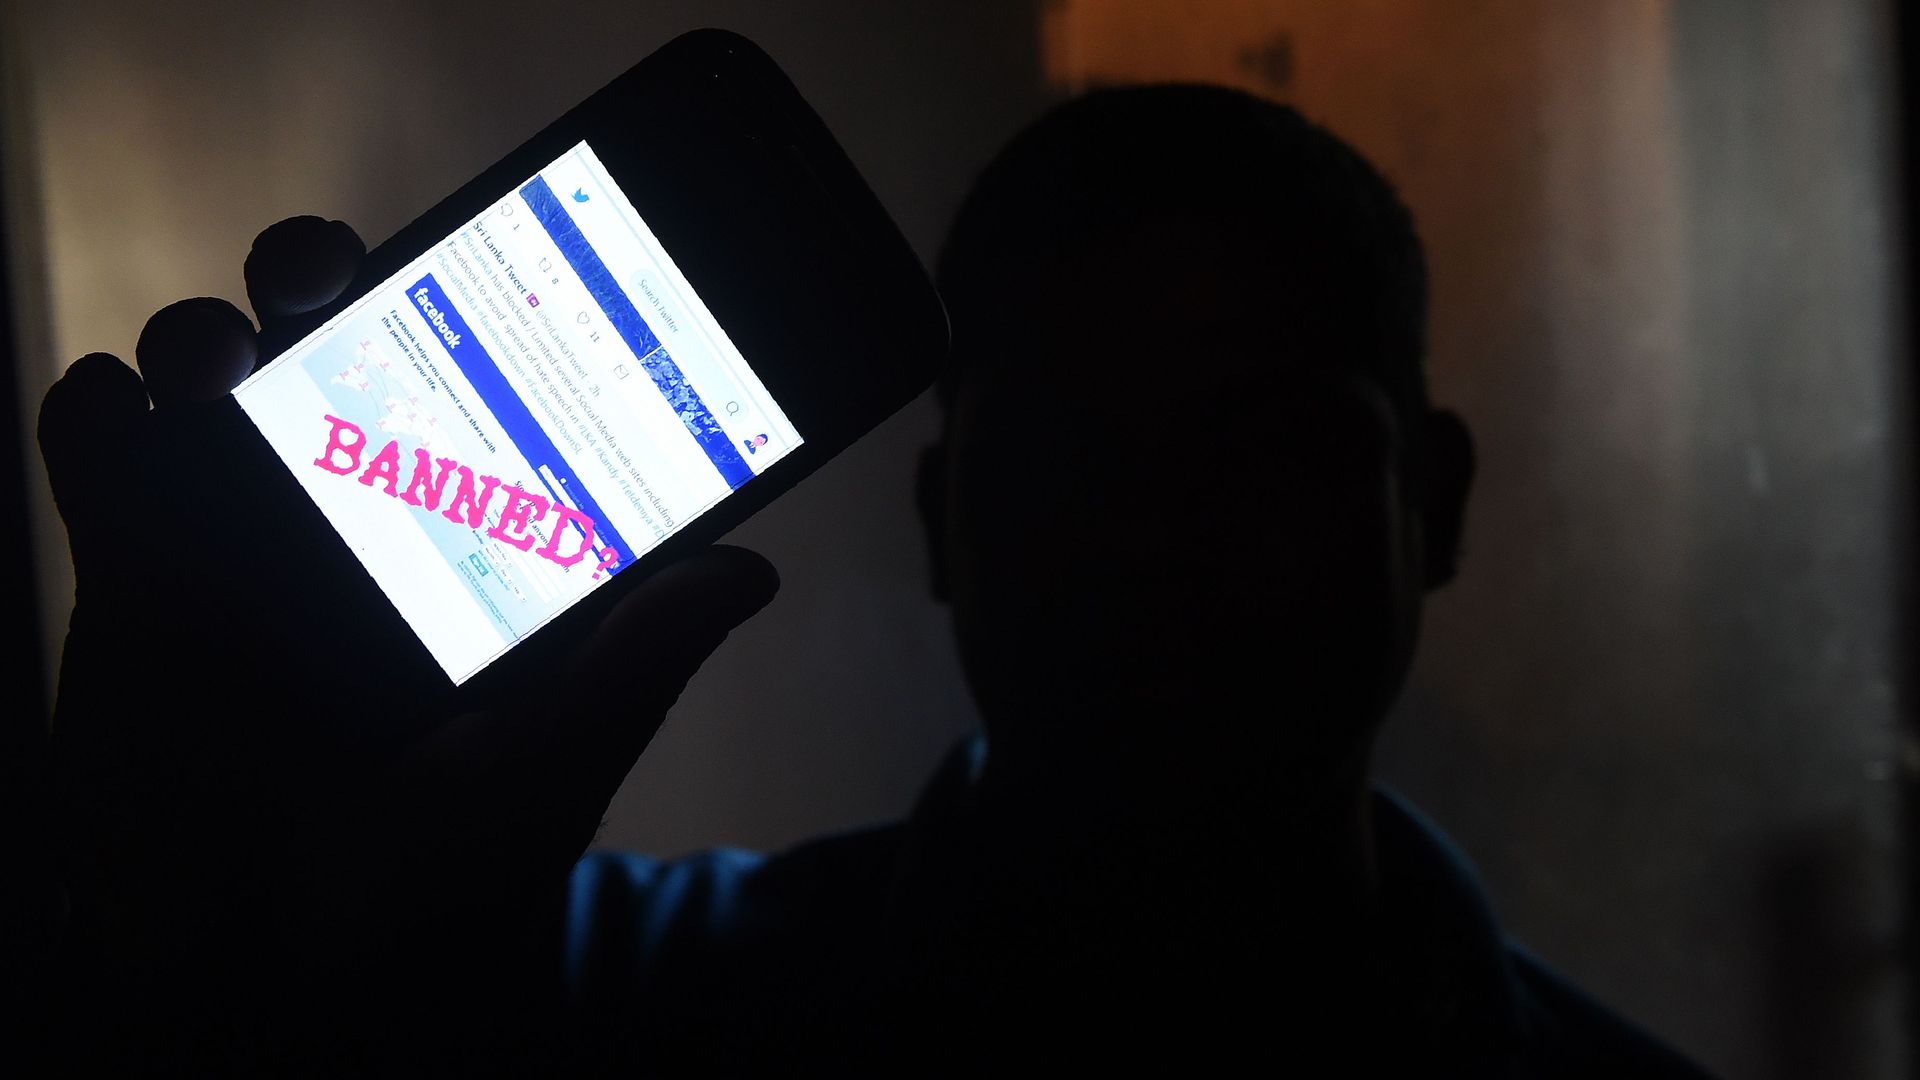 A man holds up a phone showing the Facebook app and "BANNED" written across the screen